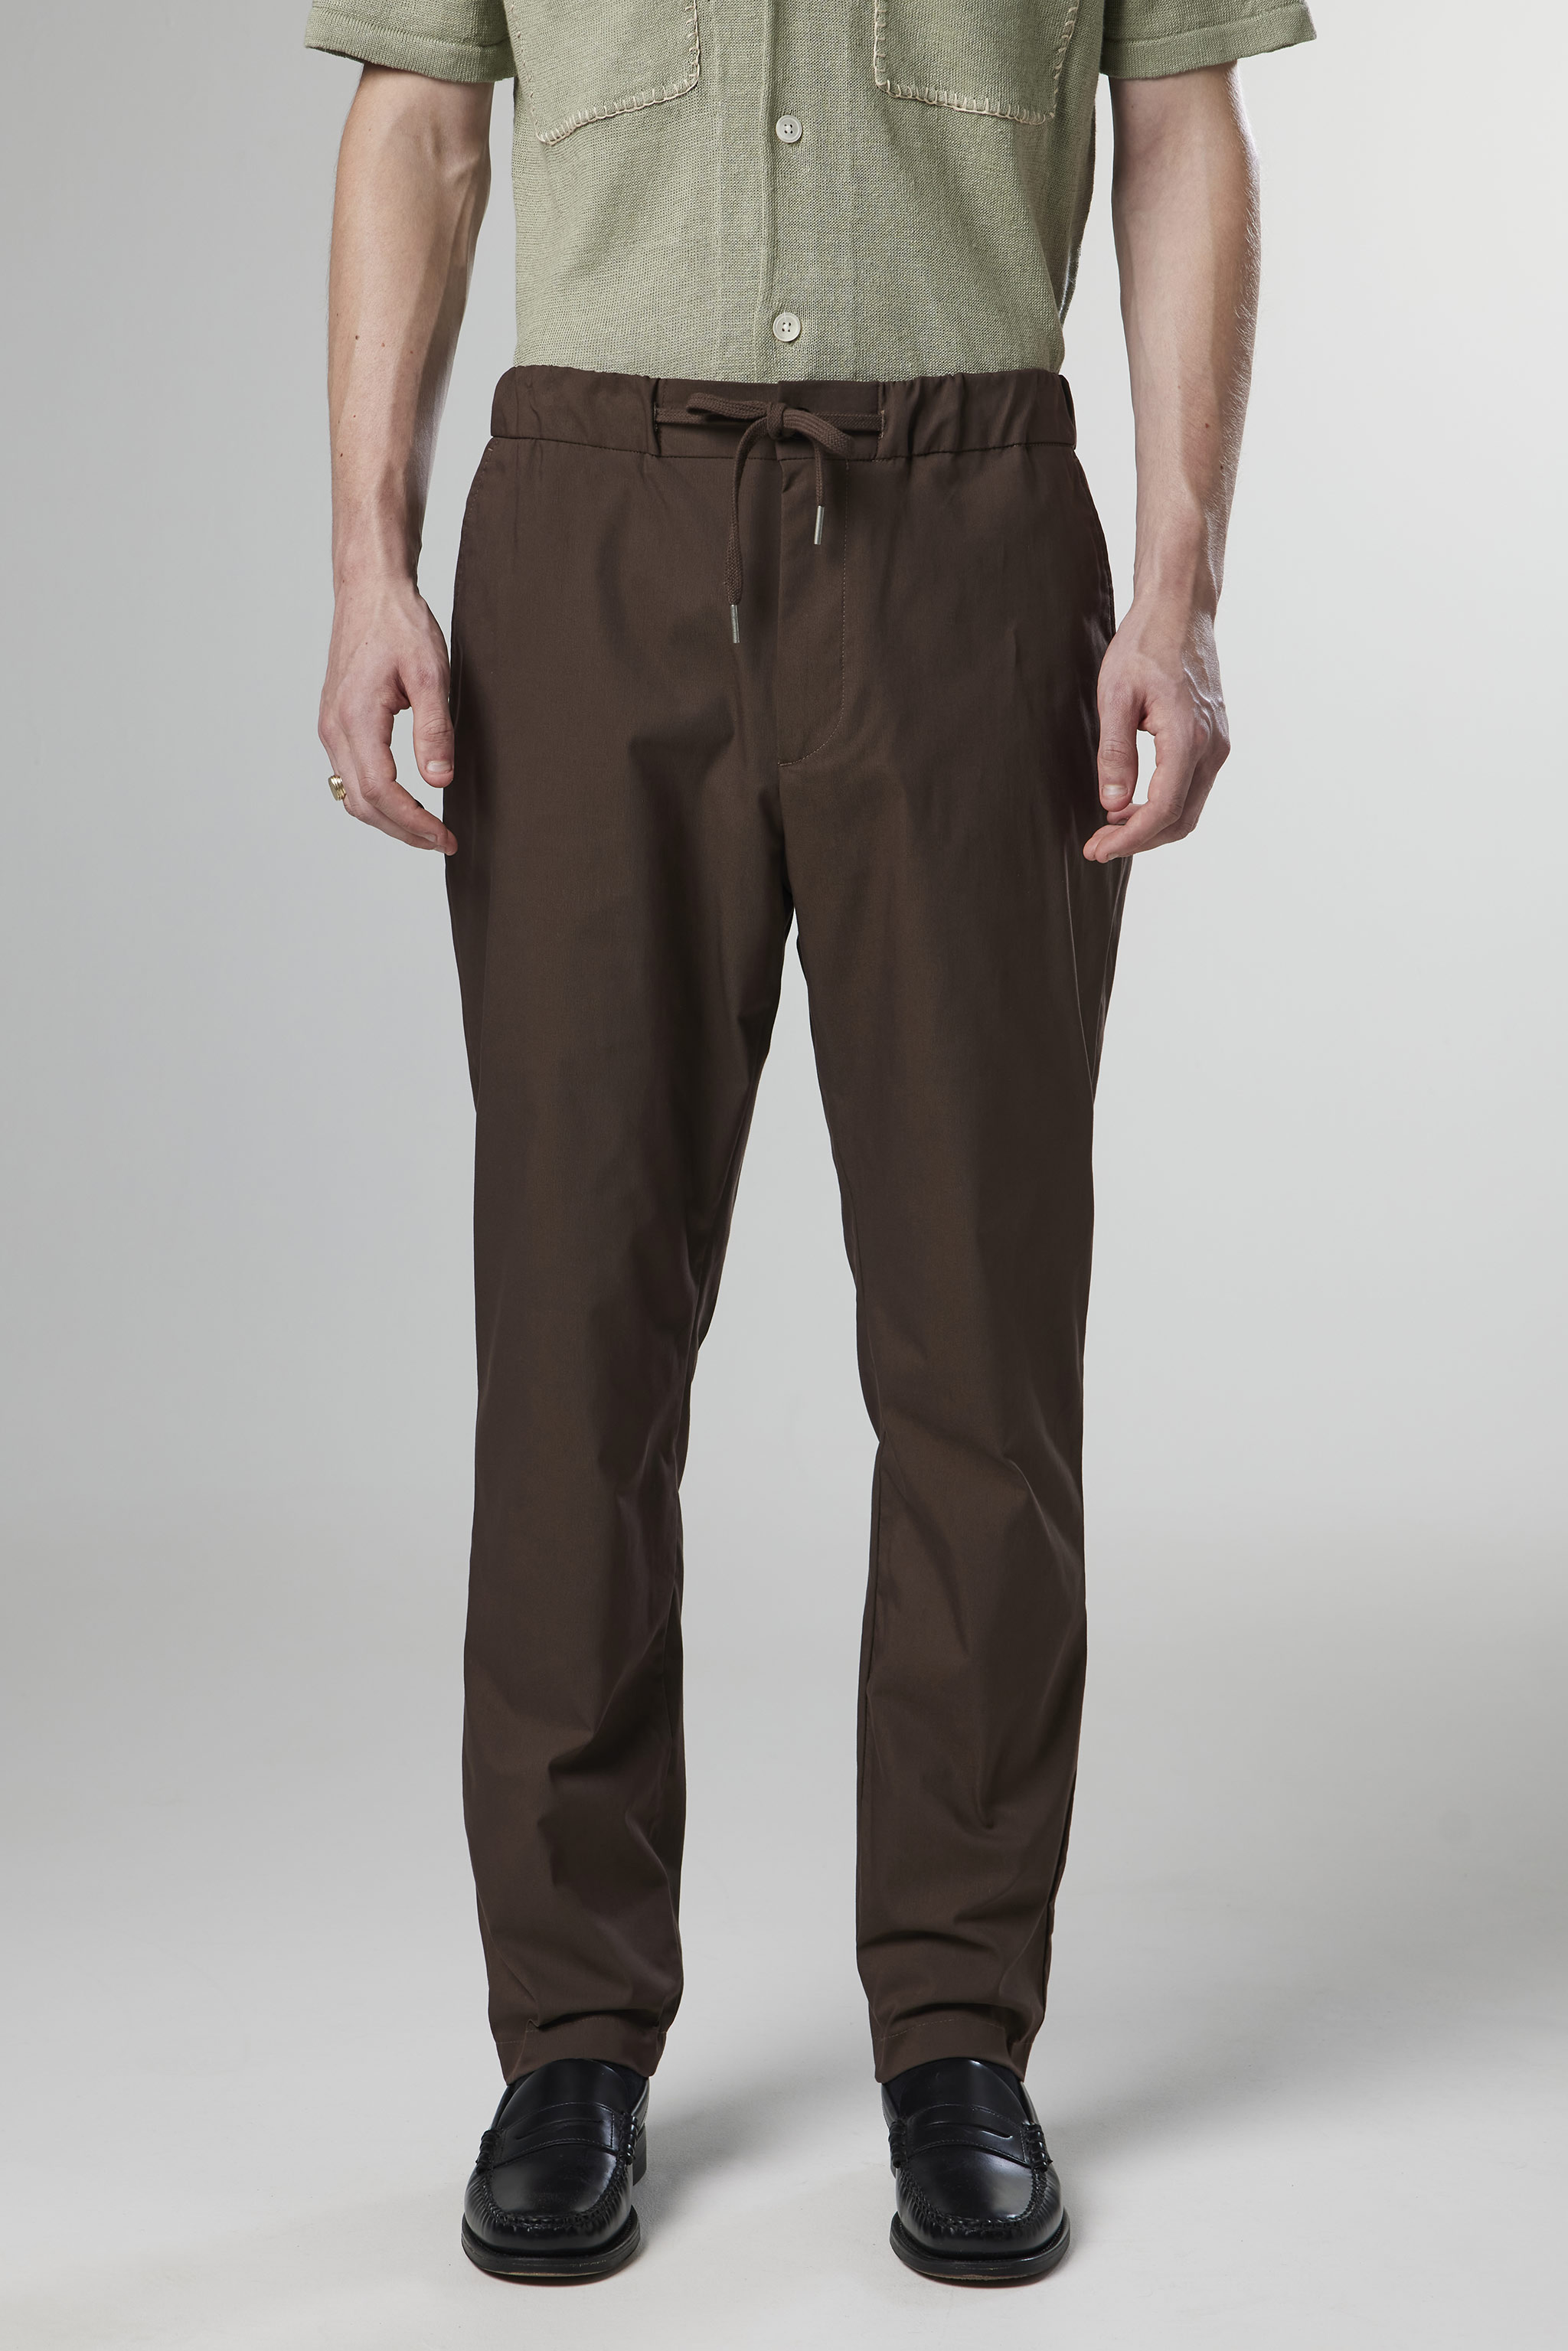 stein 22ss tapered trousersスラックス - ANTYKI-WNETRZA